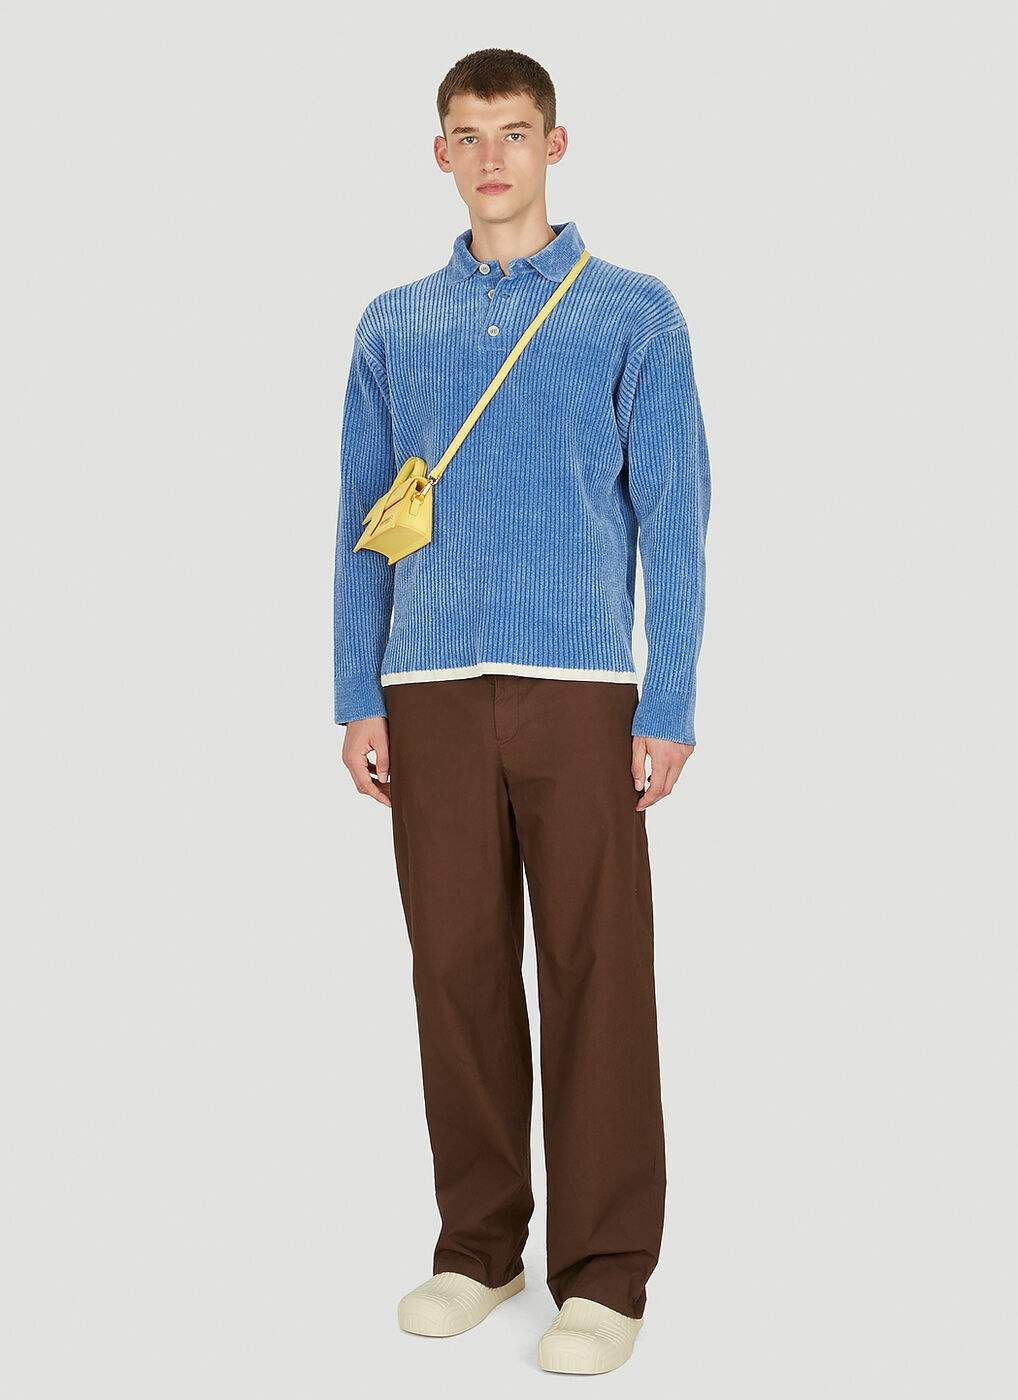 Le Duci Polo Sweater in Blue Jacquemus